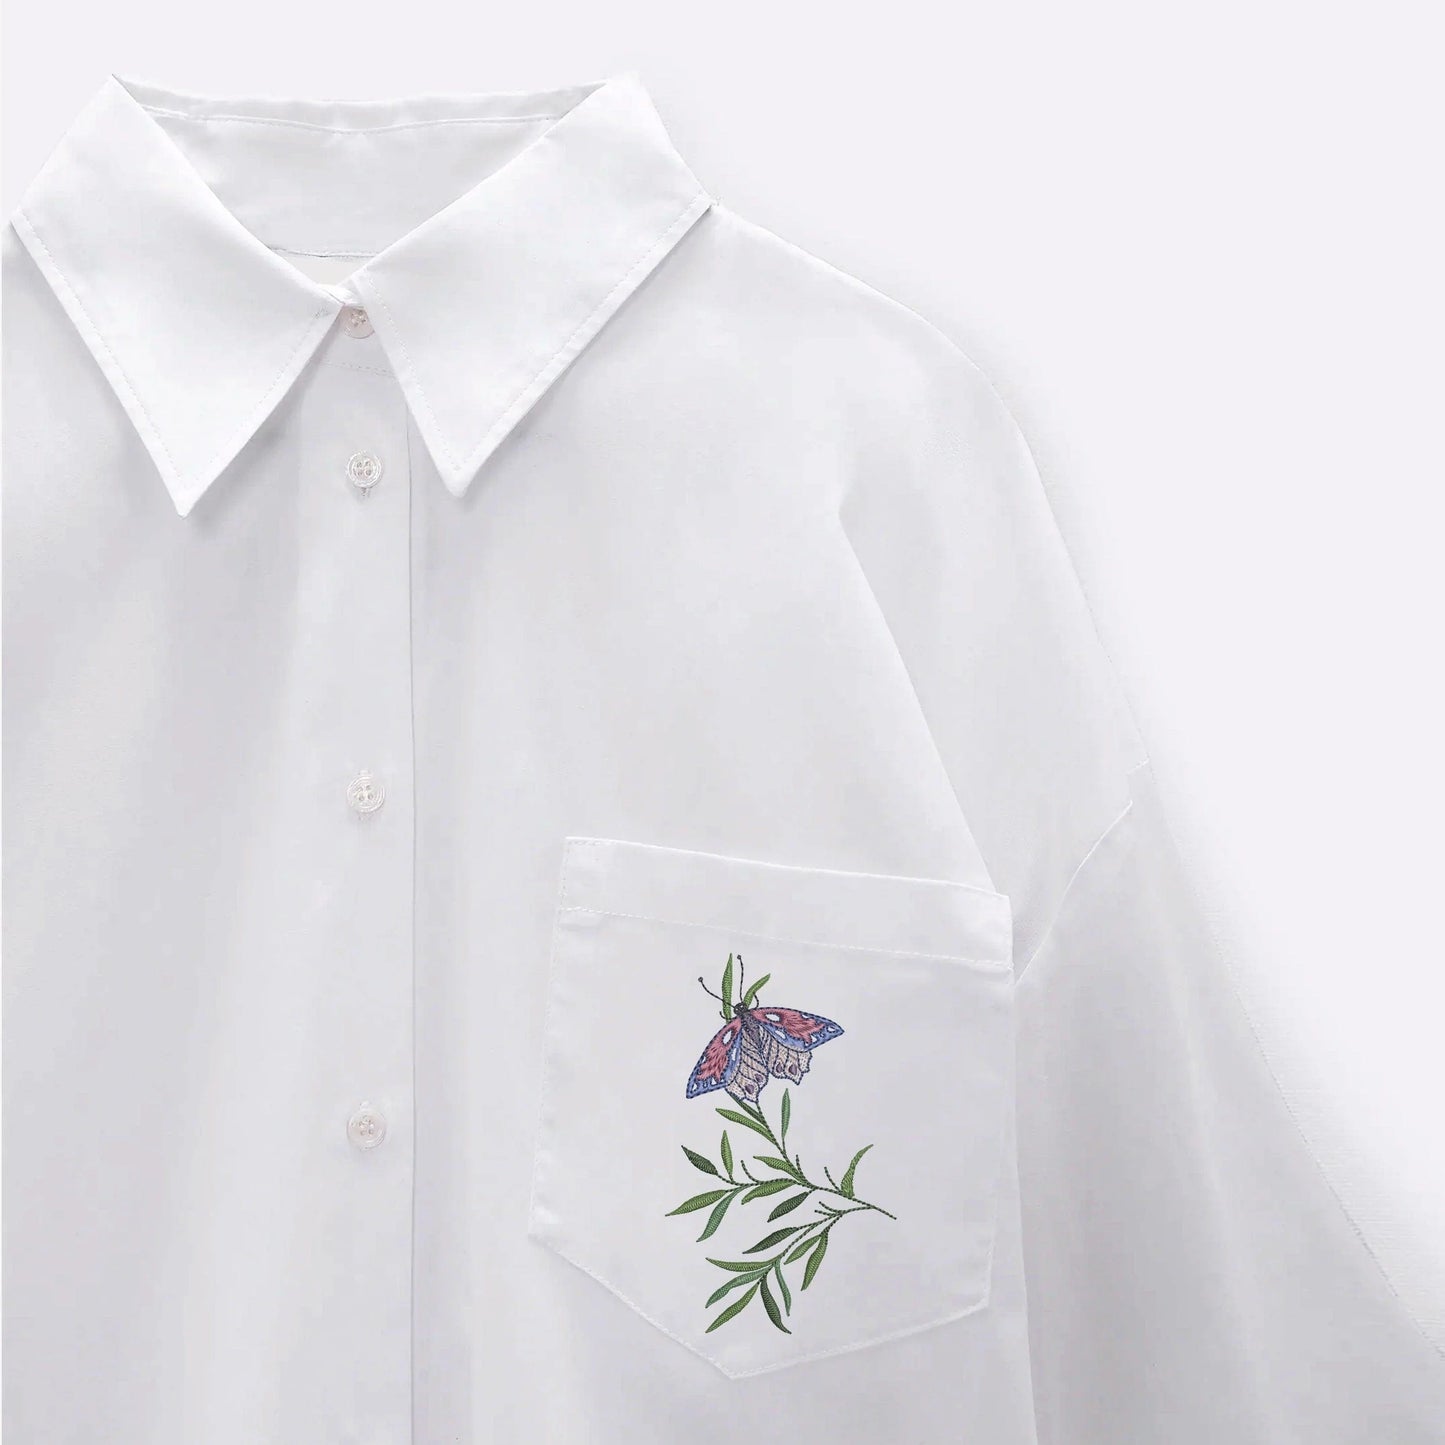 Flower Butterfly Machine Embroidery Design on blouse pocket